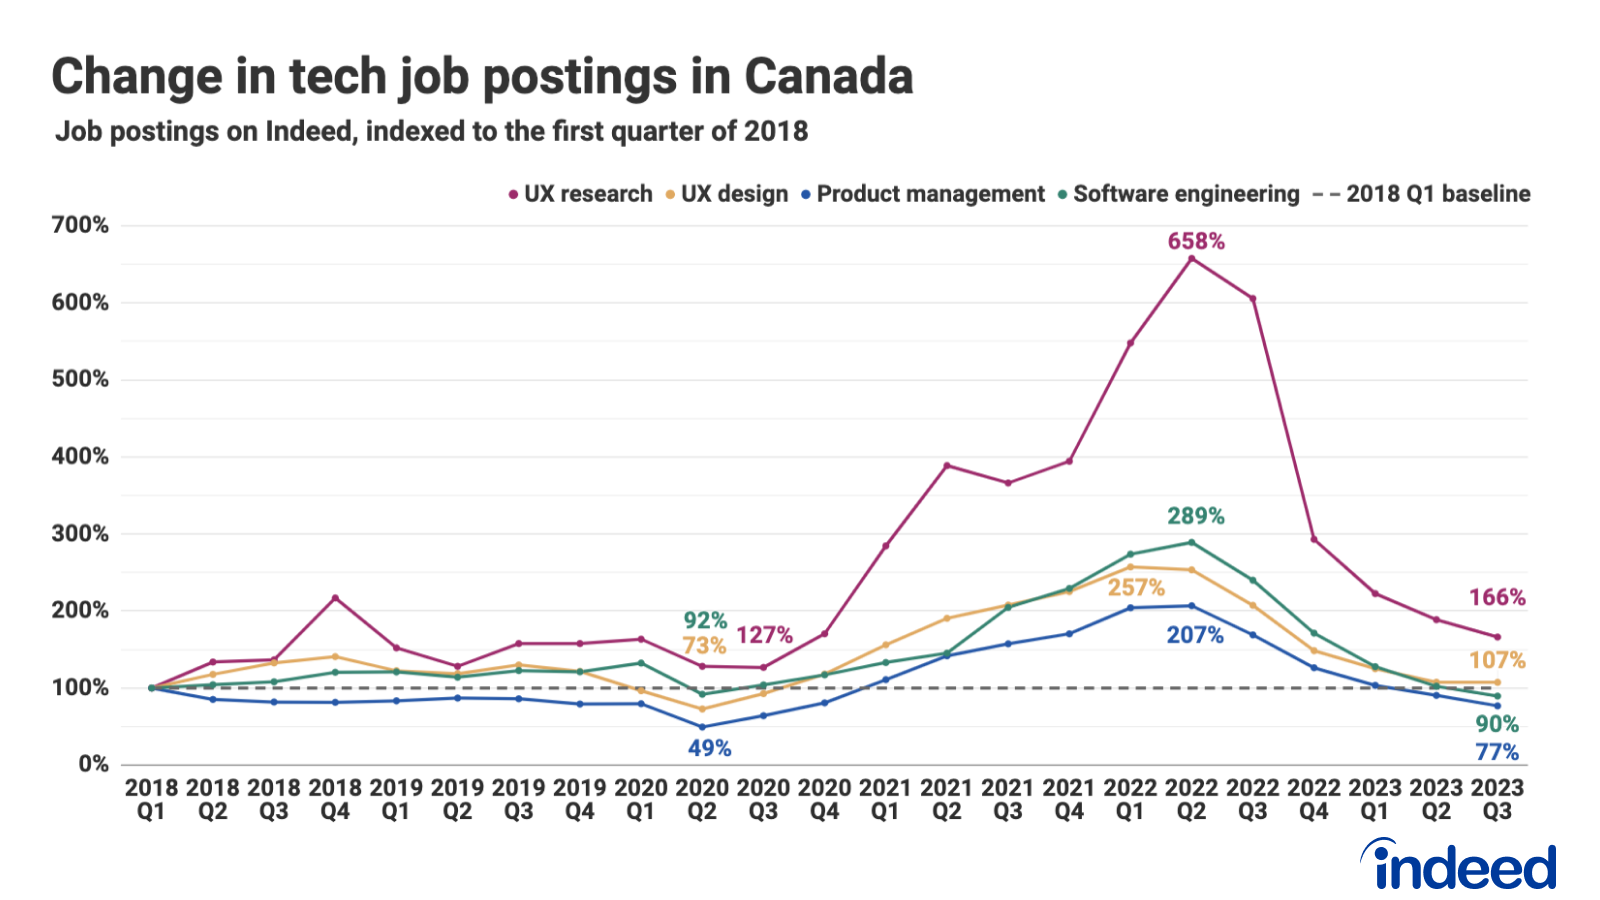 A line graph titled "Change in tech job postings in Canada" showing job post data for four roles indexed to Q1 2018